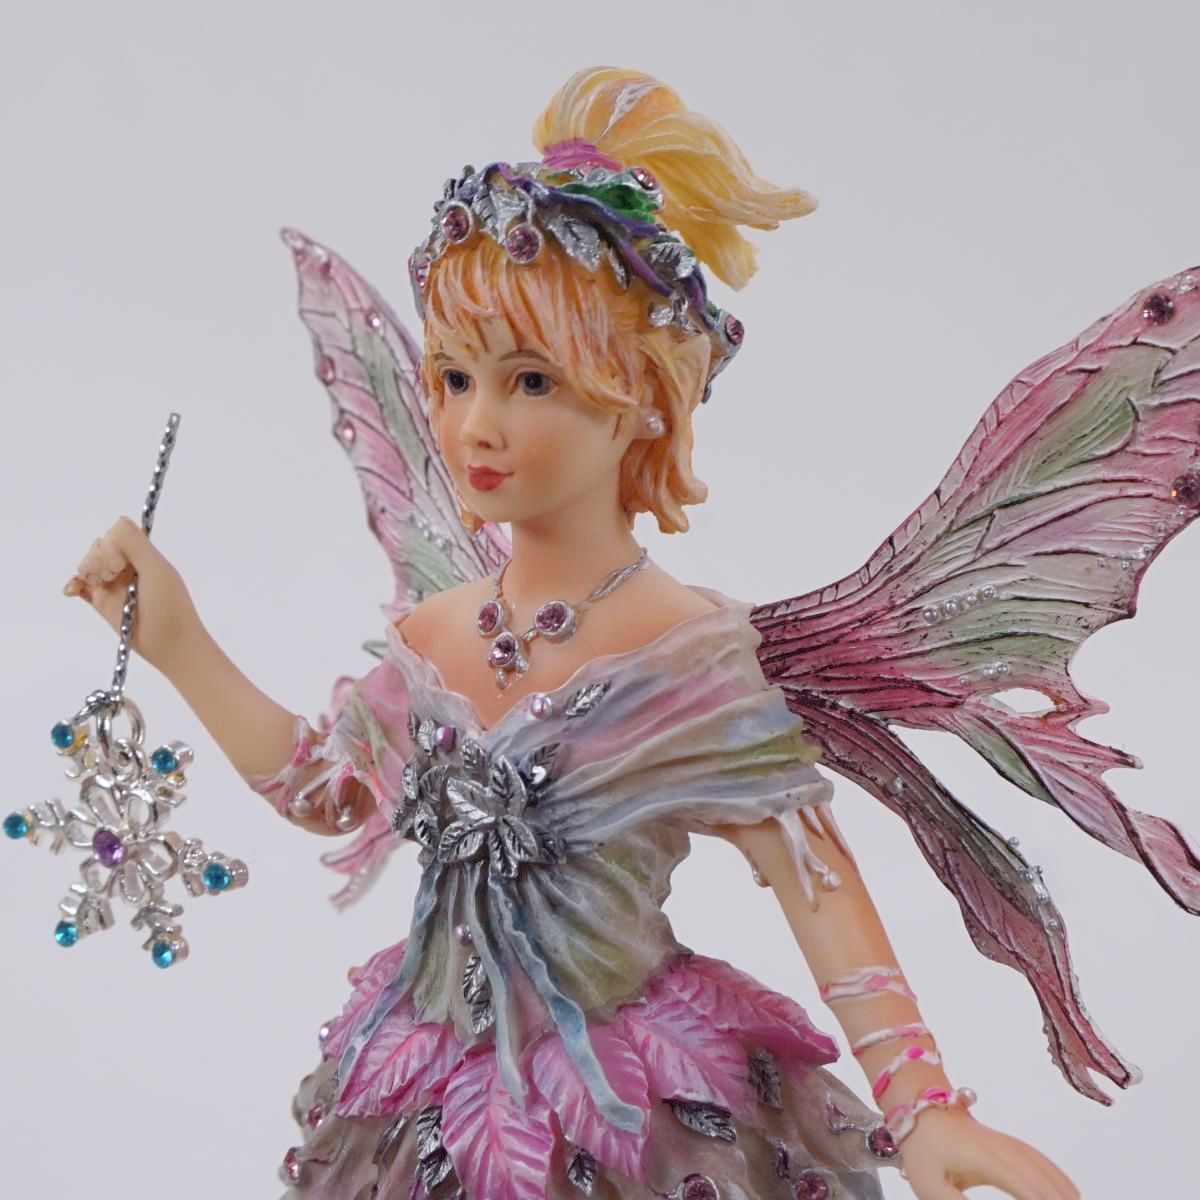 Crisalis Collection★ Silver Sparkle Faerie (1-1690) 30% OFF